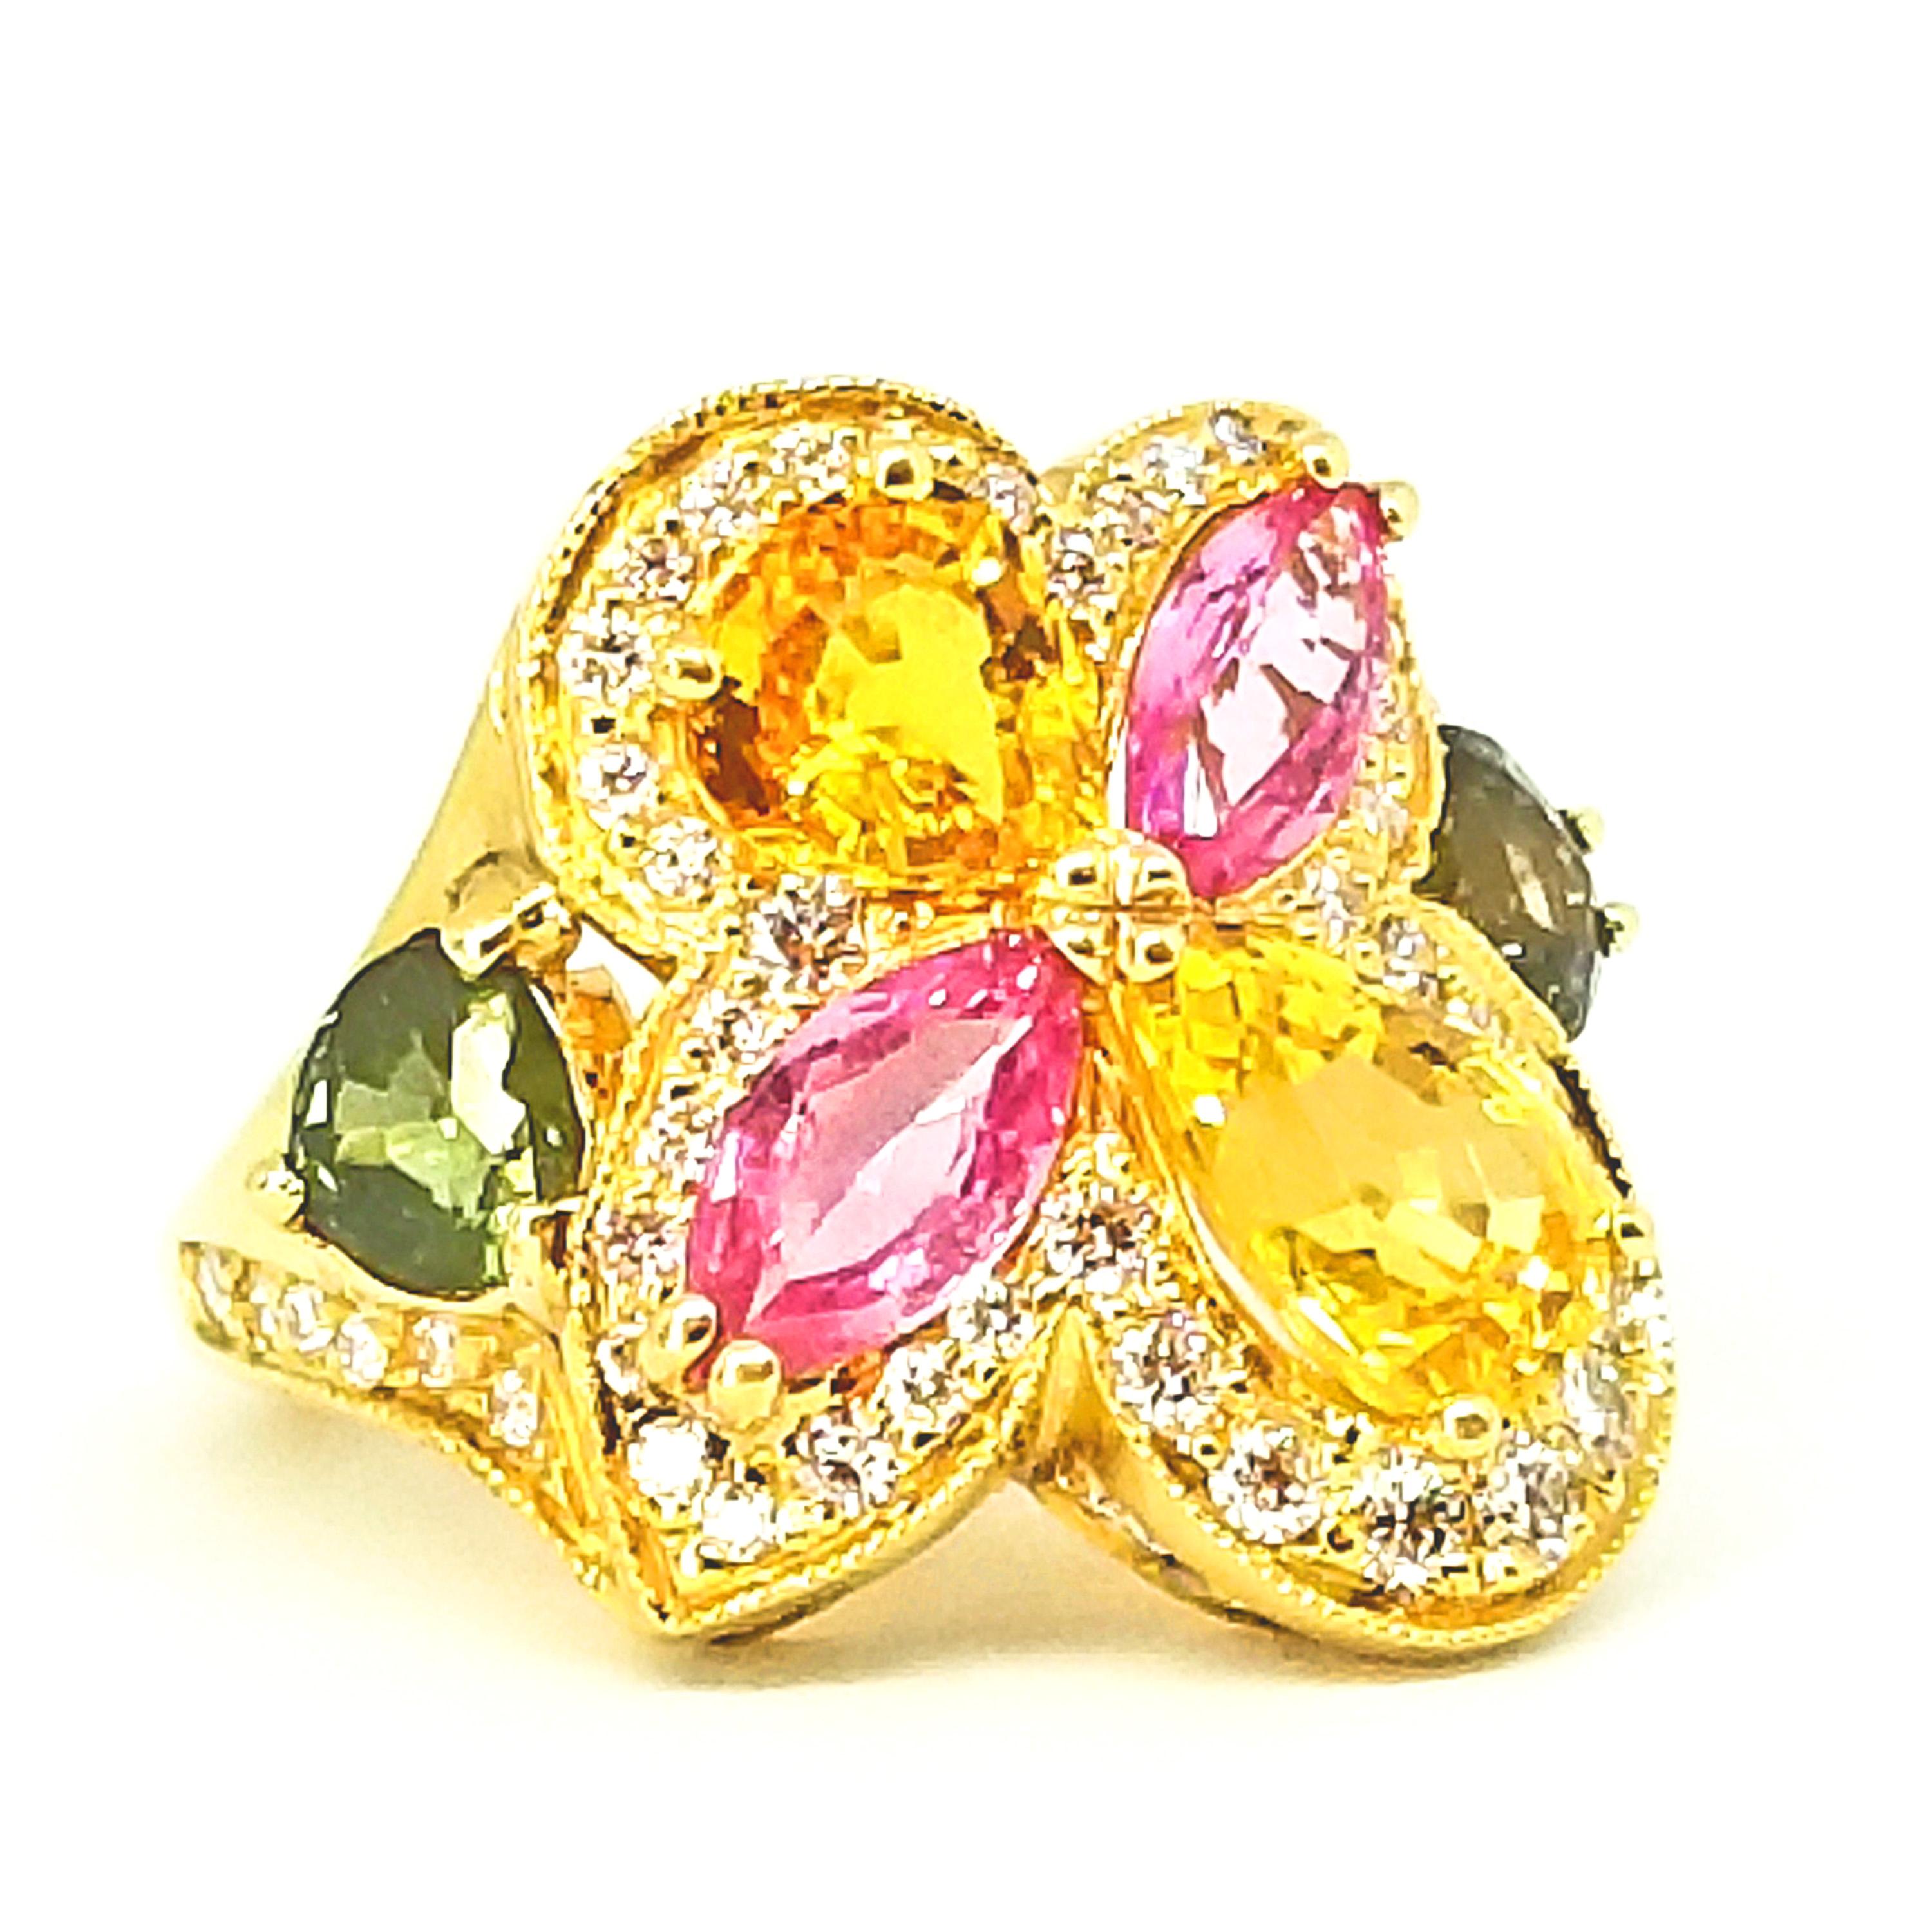 One of a Kind Cocktail Right Hand Ring is set with 6.30 carats total weight of multiple Color and Cut Sapphires. Set in a Floral Cluster are two Golden Yellow Sapphire Pear Shapes, two Bubble Gum Pink Marquis Sapphires and two Deep Green Heart Shape